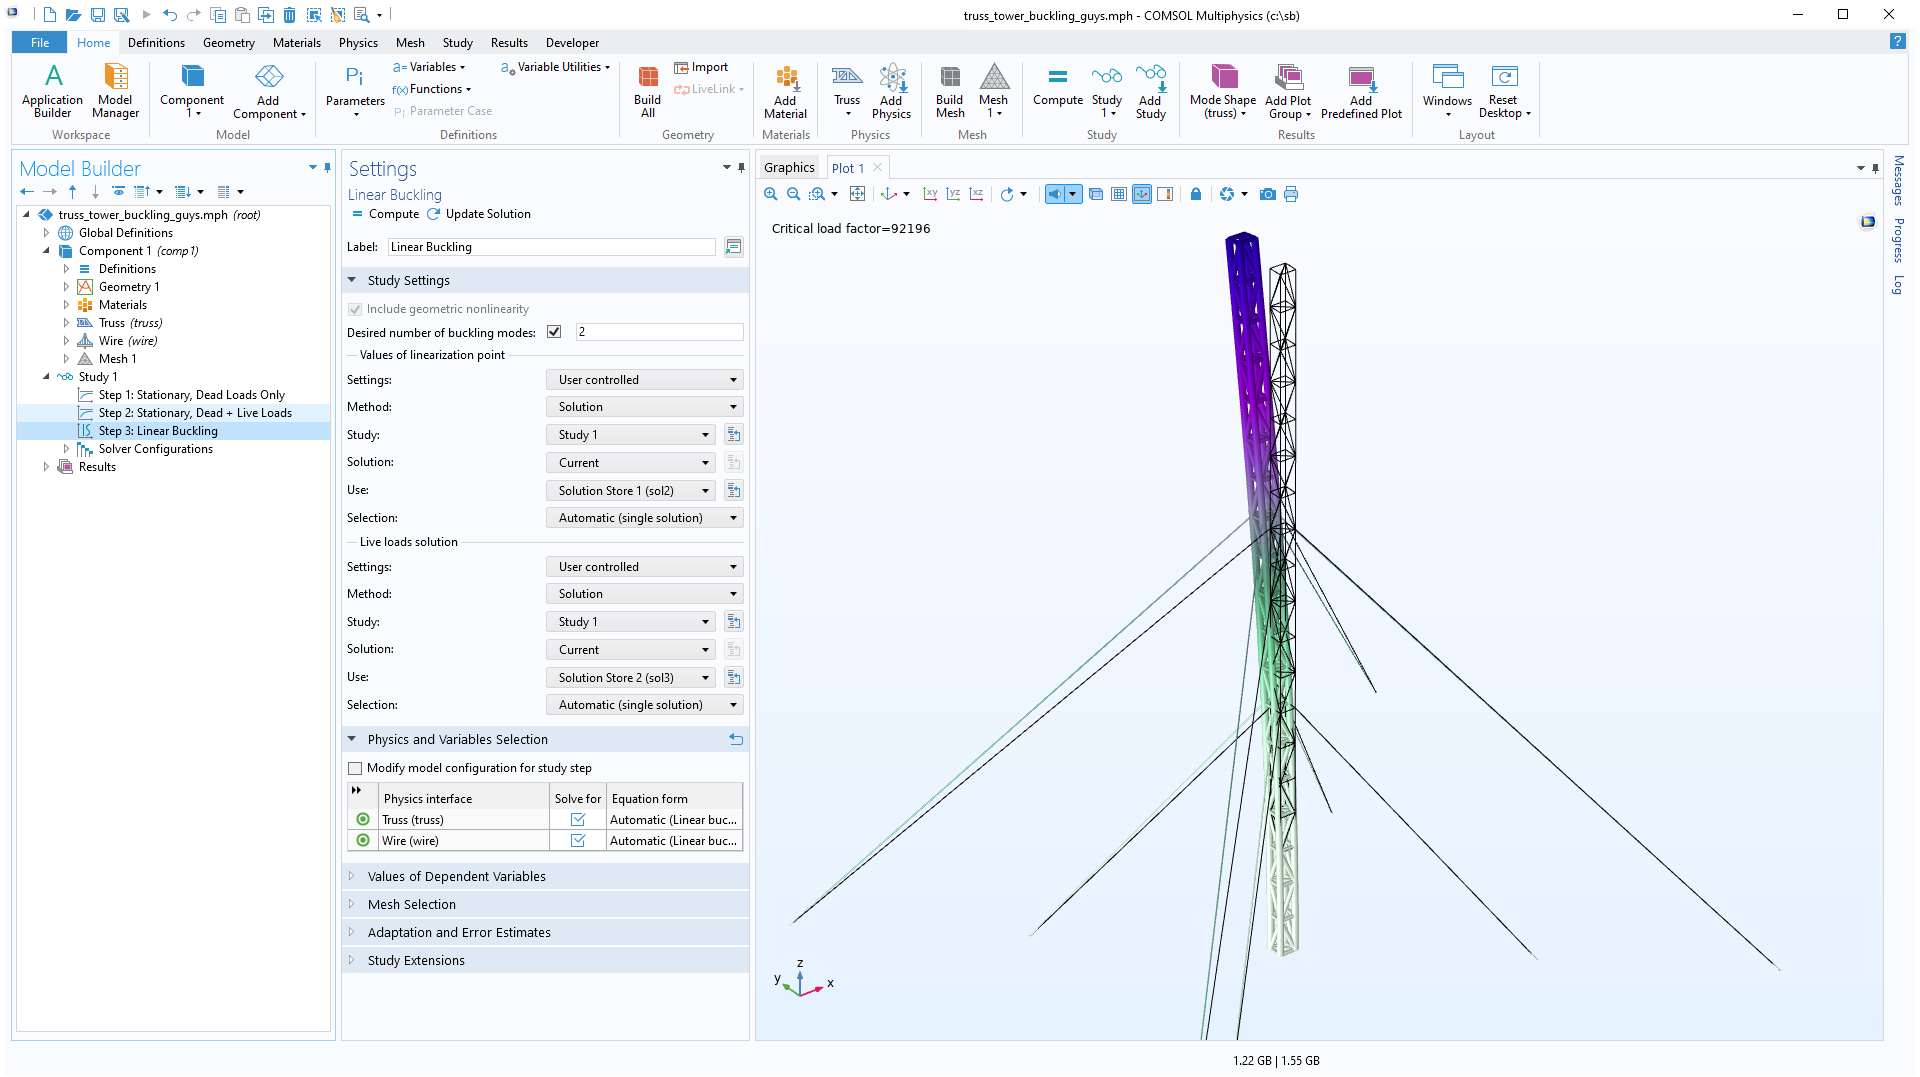 The COMSOL Multiphysics UI showing the Model Builder with the Step 3: Linear Buckling node selected, the corresponding Settings window, and truss tower model in the Graphics window.